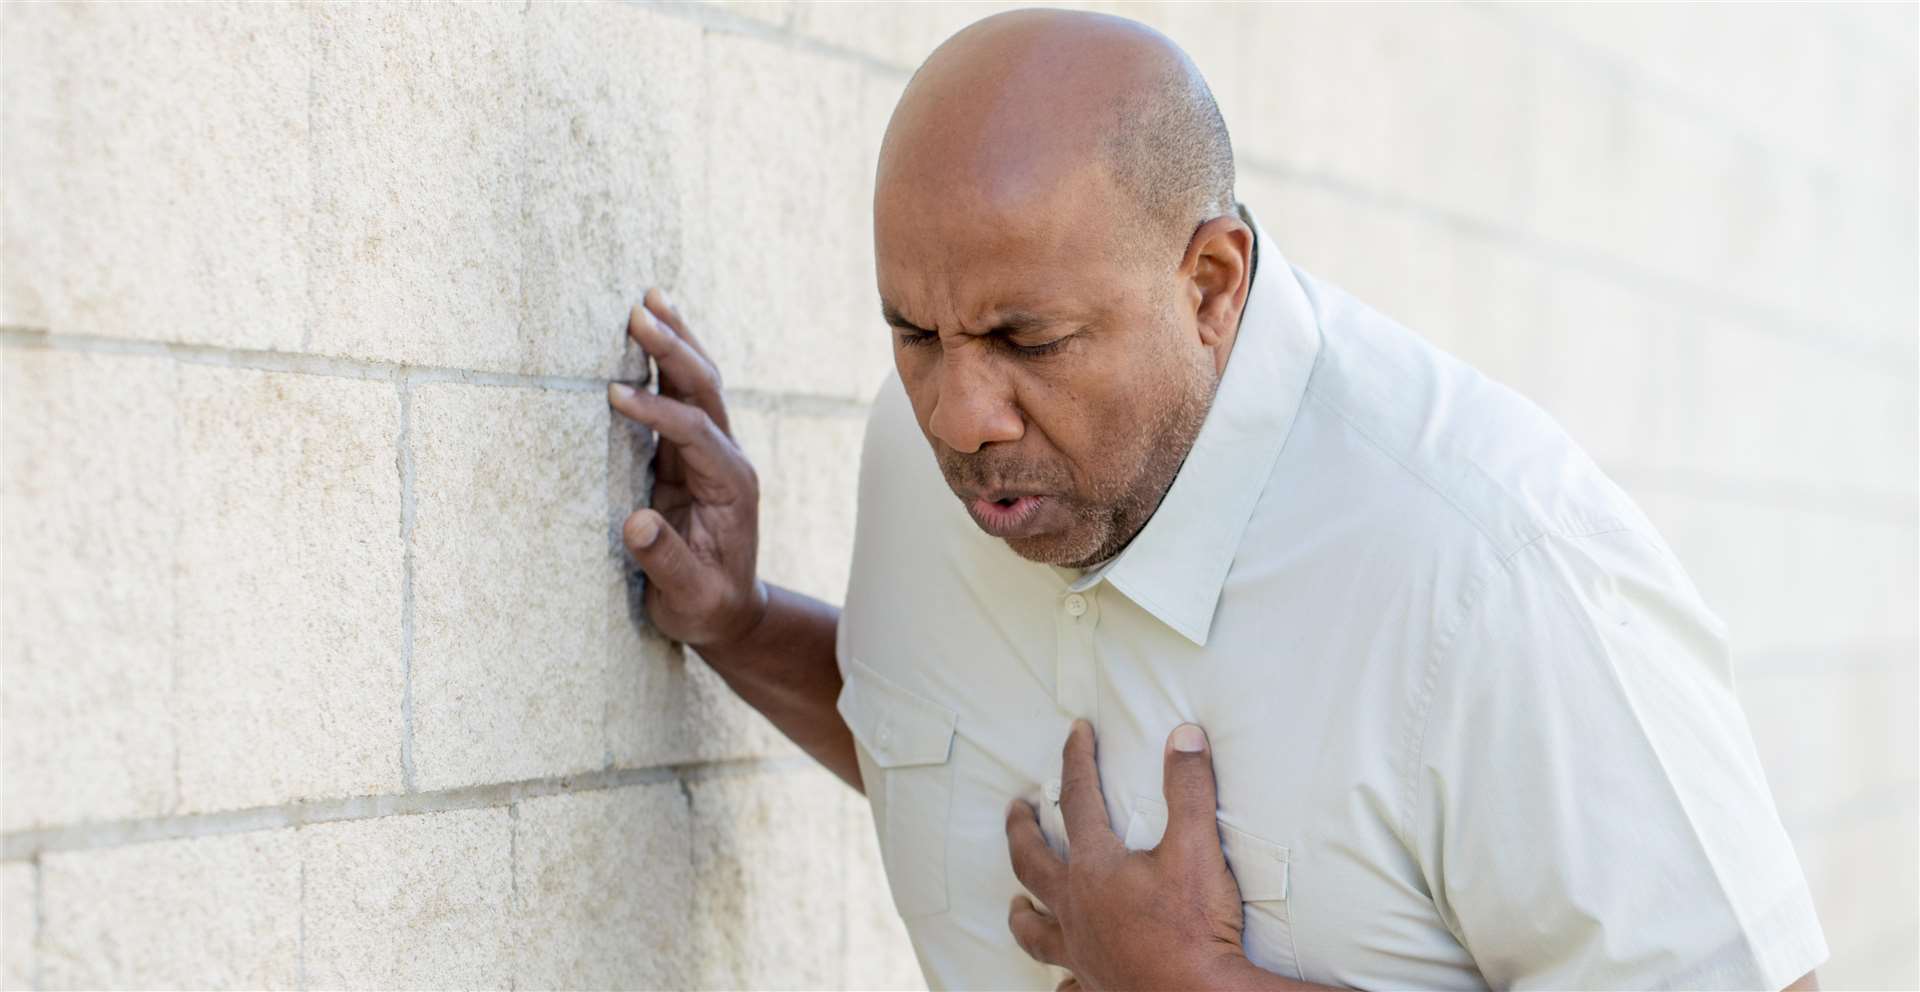 Around 80% of heart attacks and strokes in people under 75 could be prevented (Getty Images)